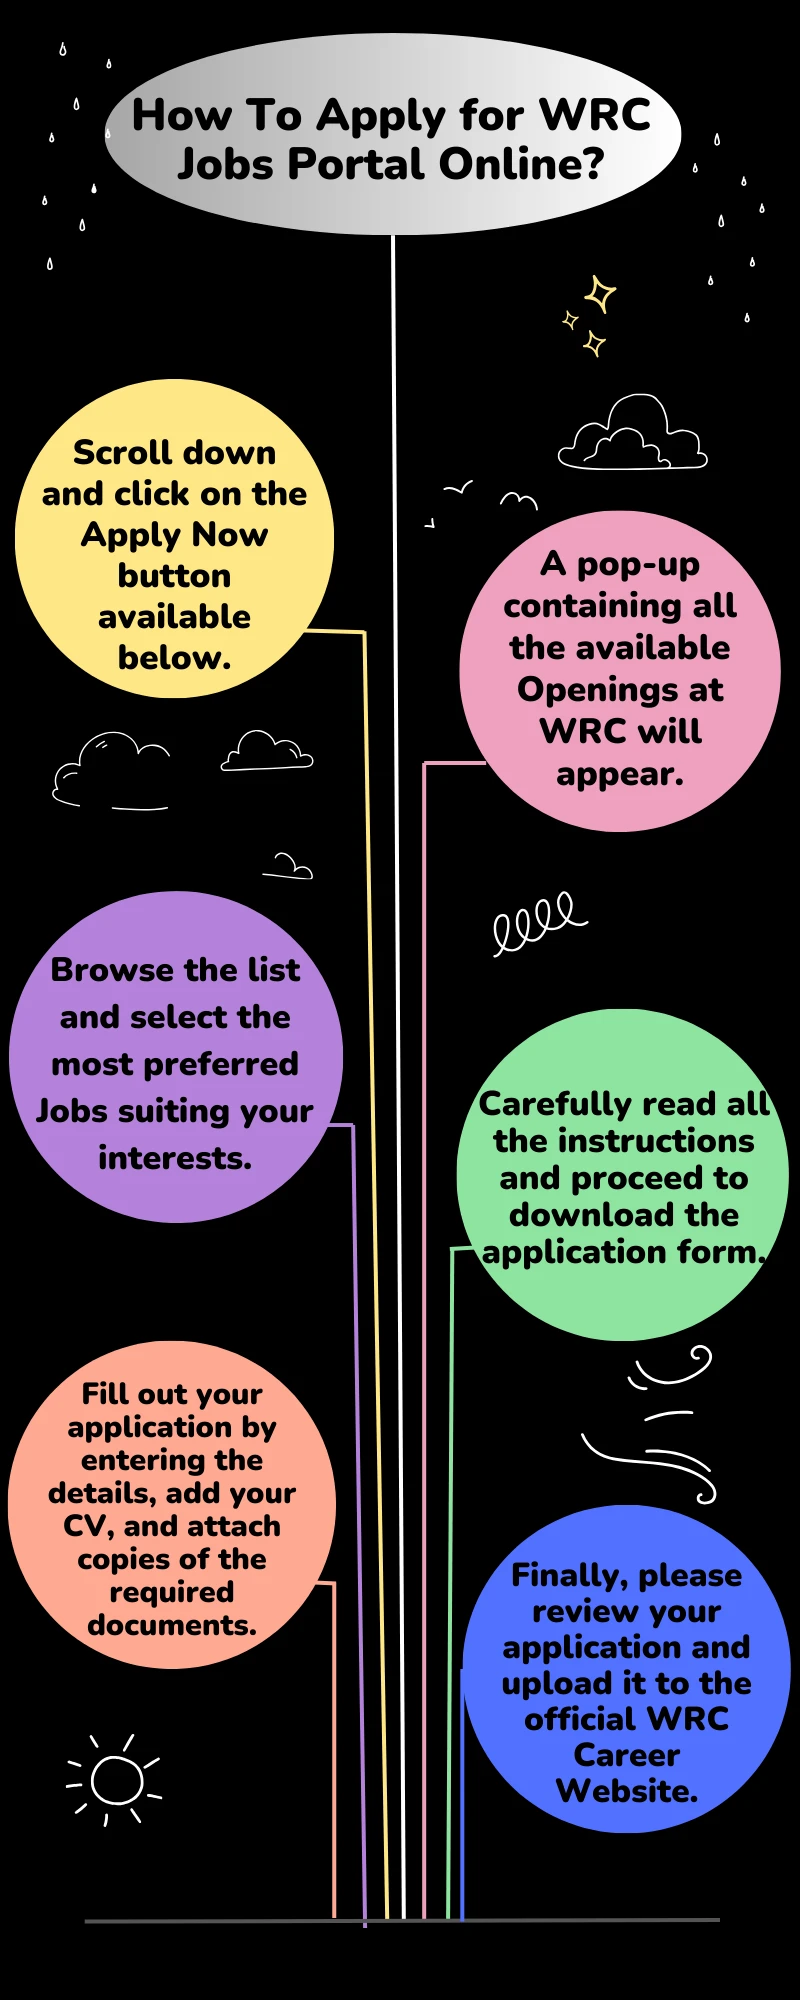 How To Apply for WRC Jobs Portal Online?